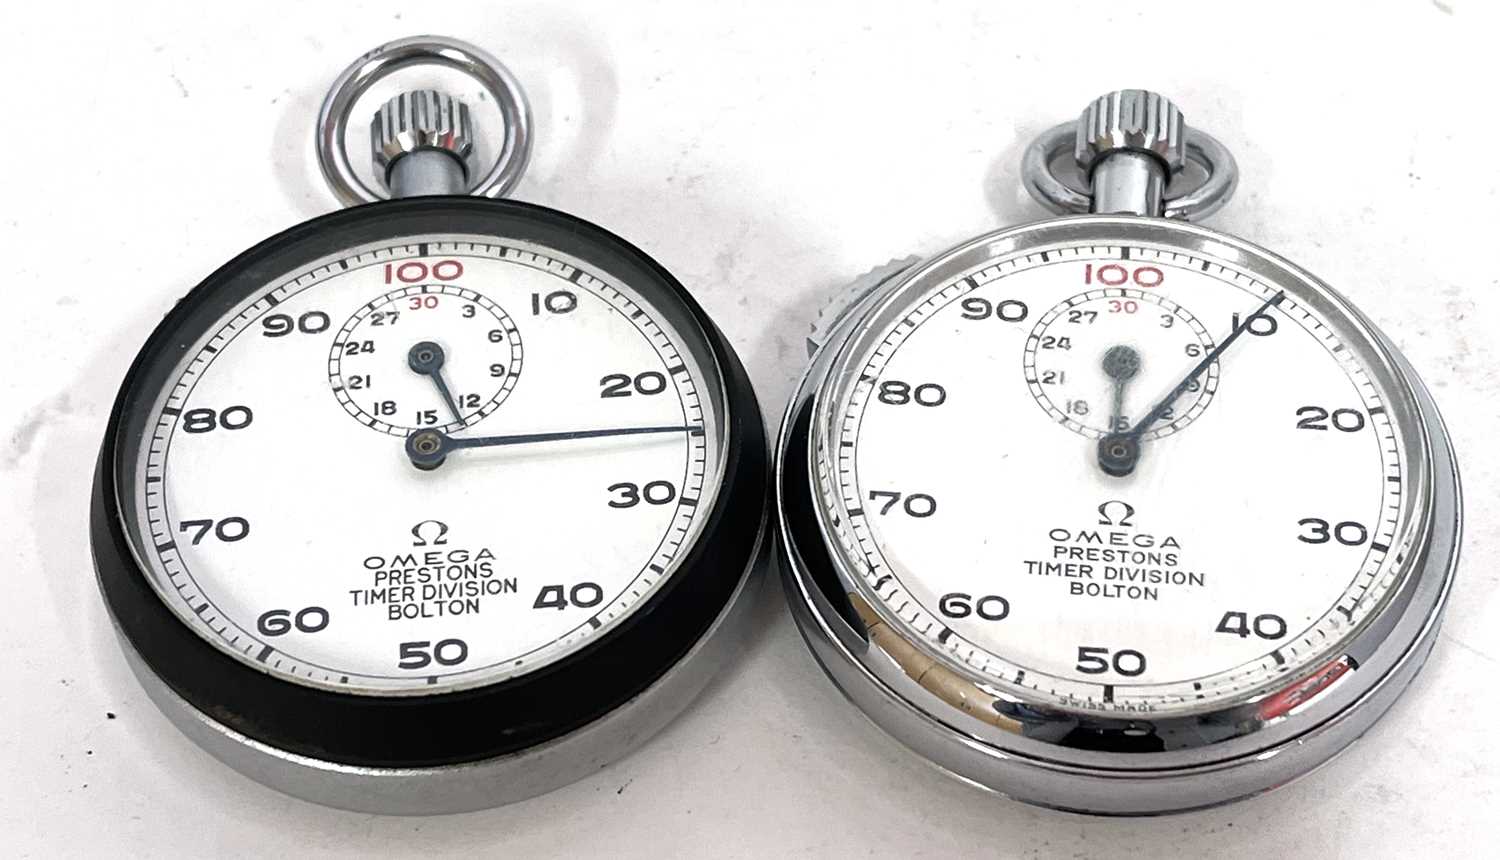 Two Omega Stopwatches, both have manually crown wound movements with white dials and contrasting